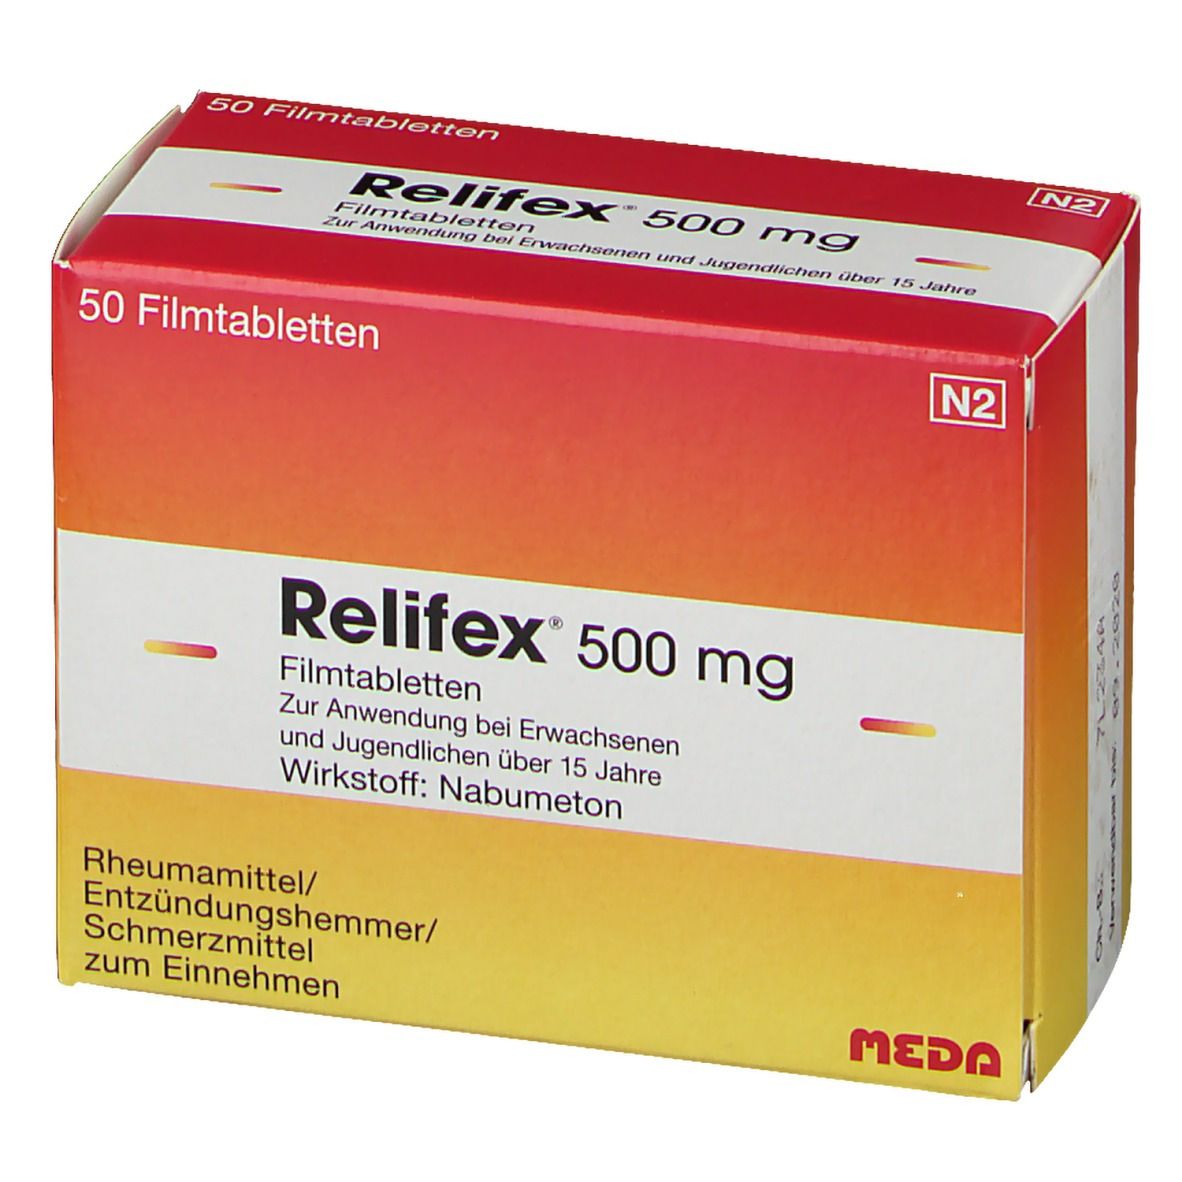 Relifex® 500 mg